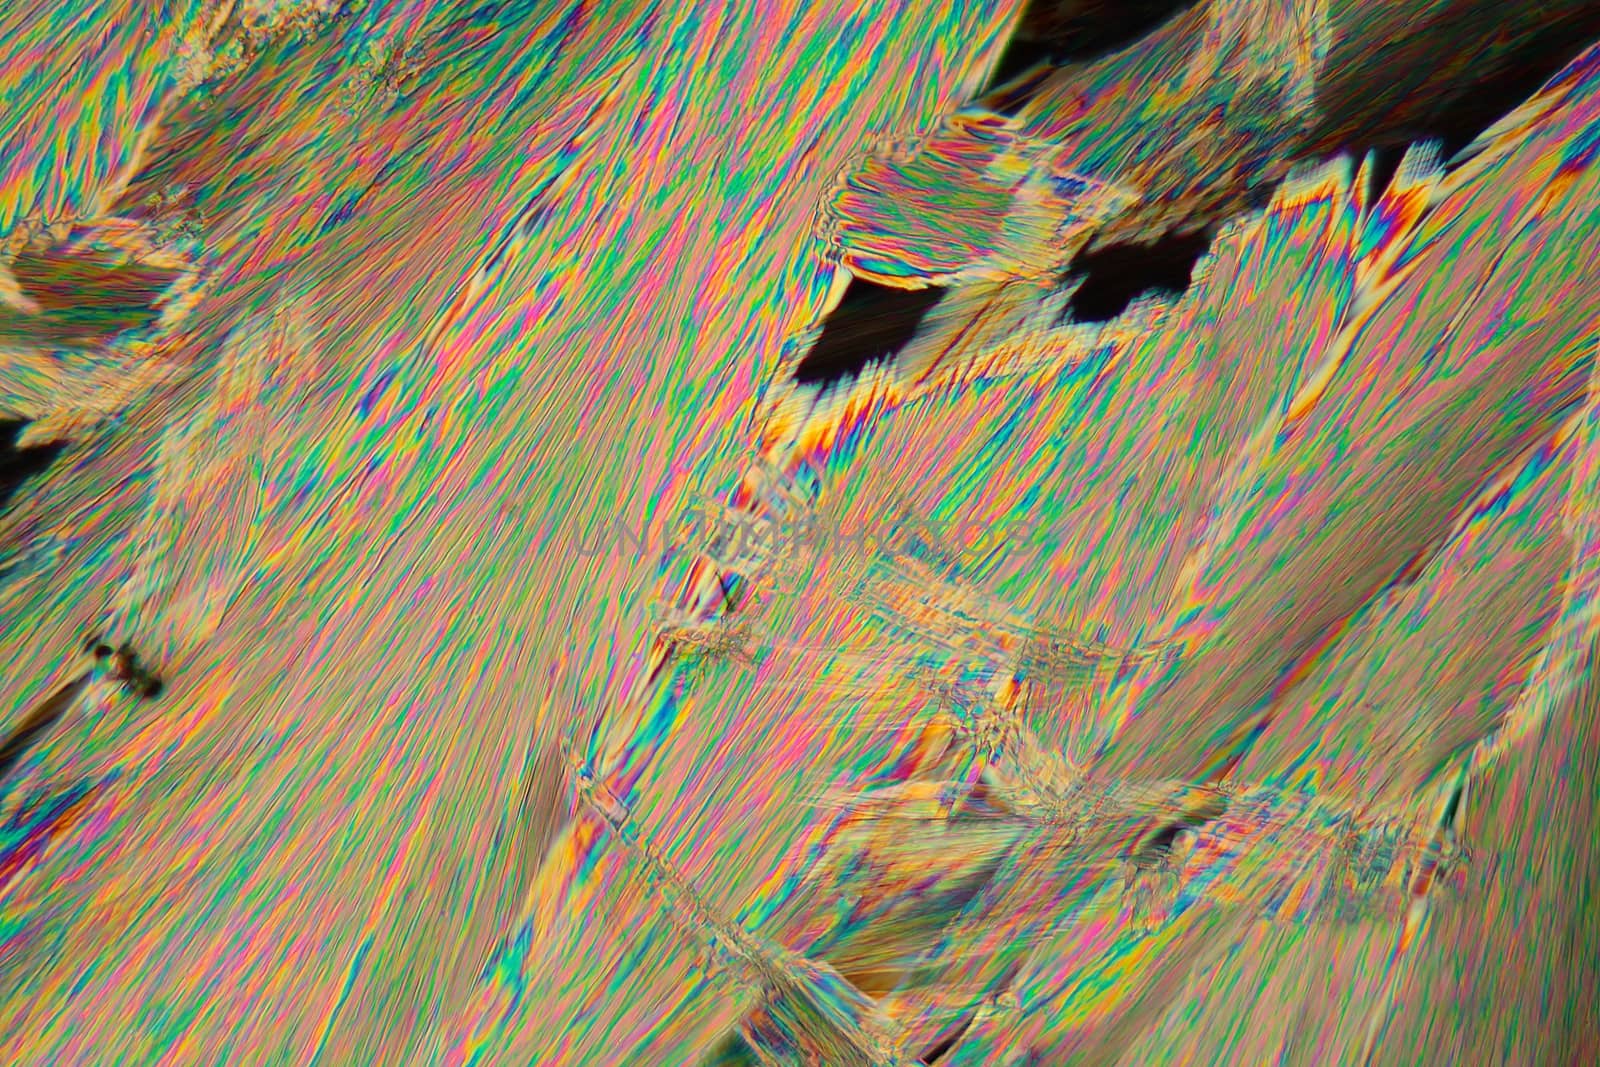 Crystals of acetylsalicylic acid under a microscope. The crystals are precipitated from a solution on a microscope slide and photographed in polarized light.